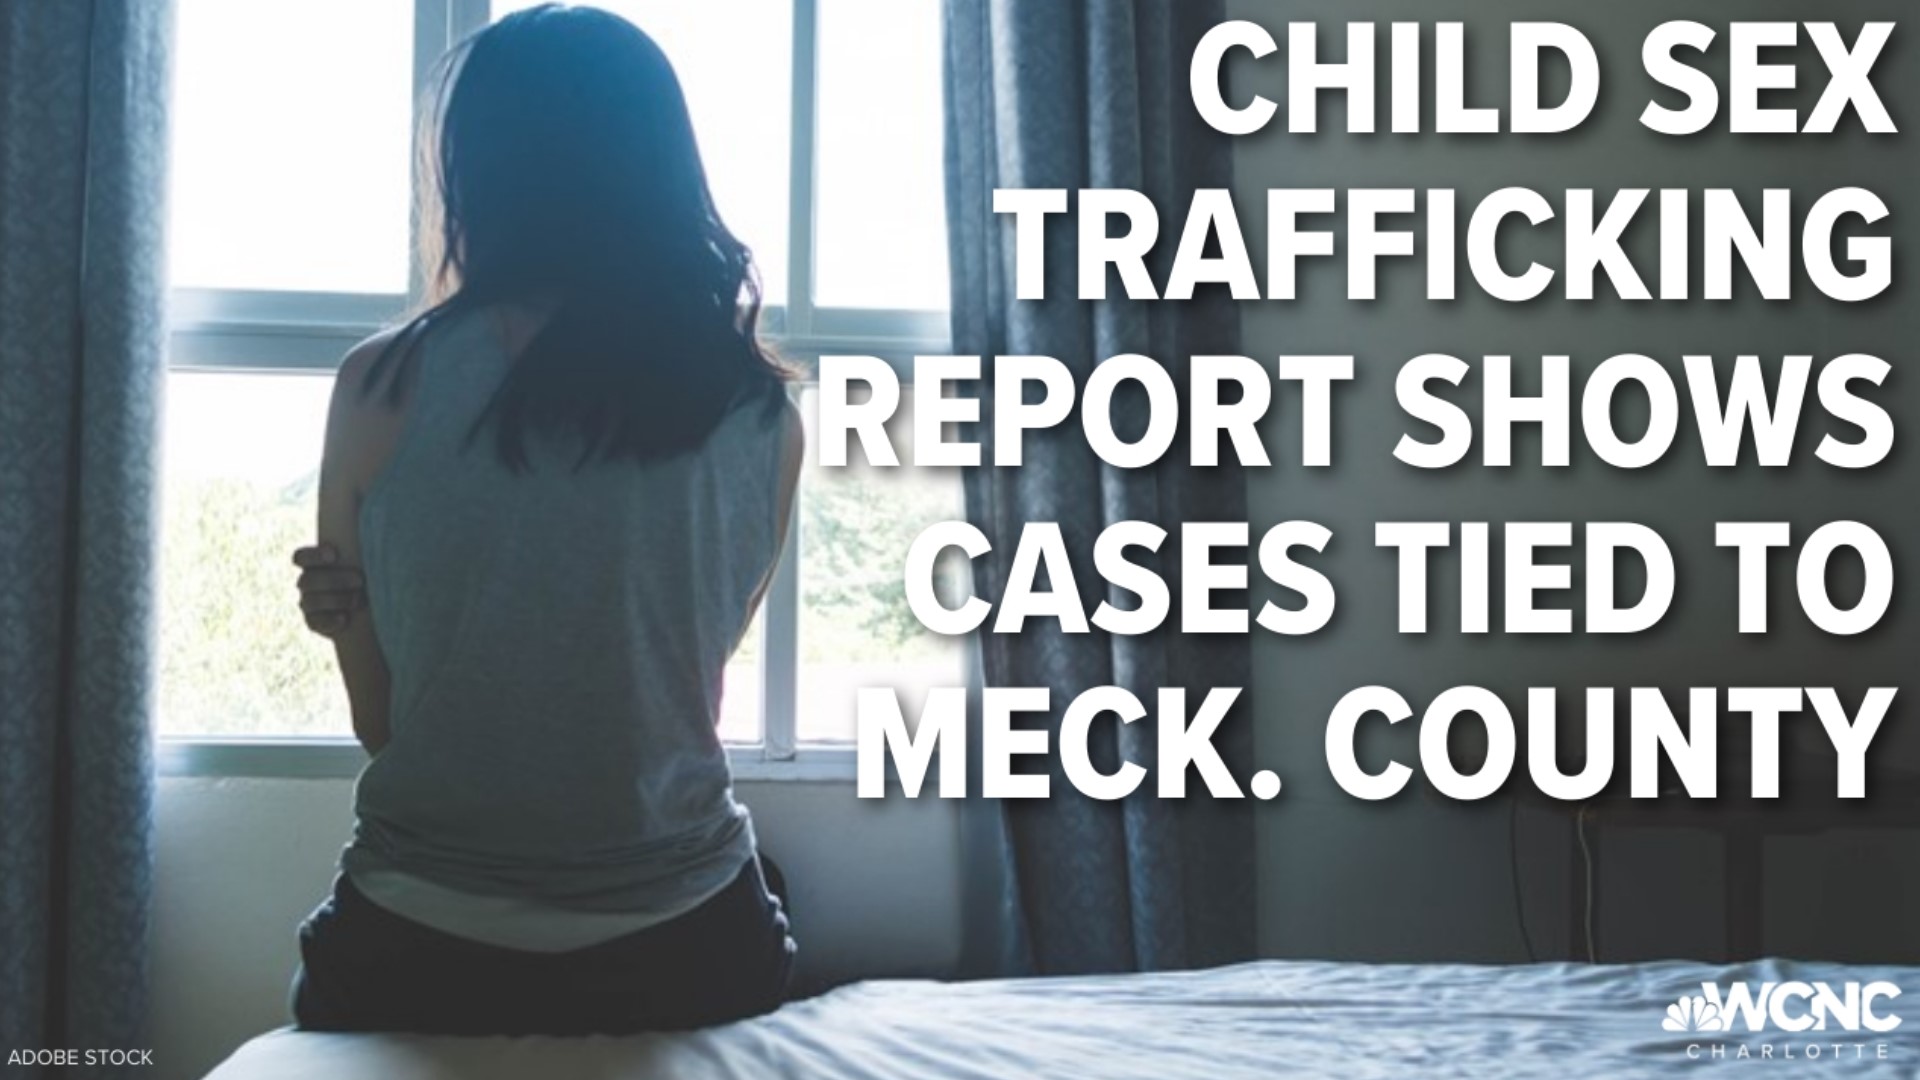 Child sex trafficking report shows cases tied to Mecklenburg Co photo